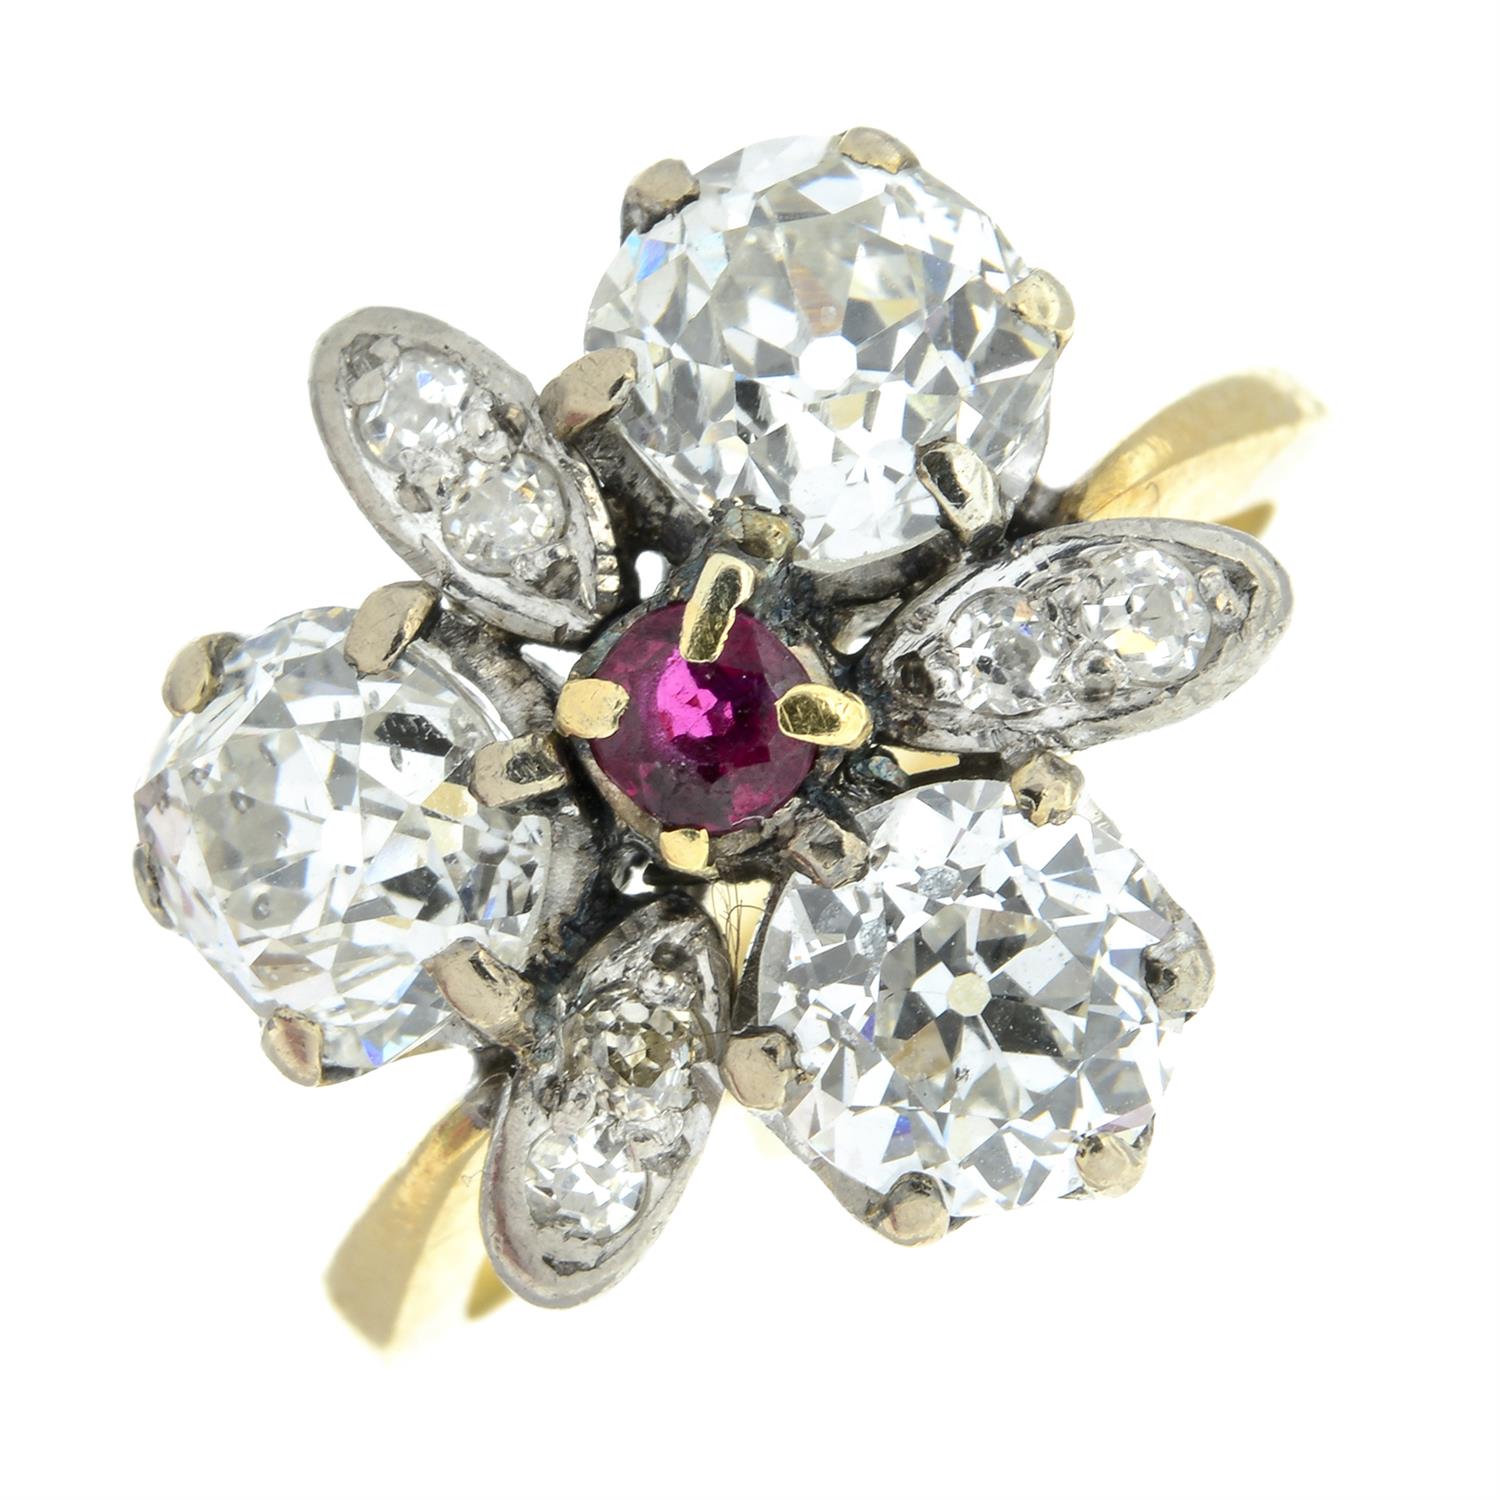 Diamond and spinel floral cluster ring - Image 2 of 5